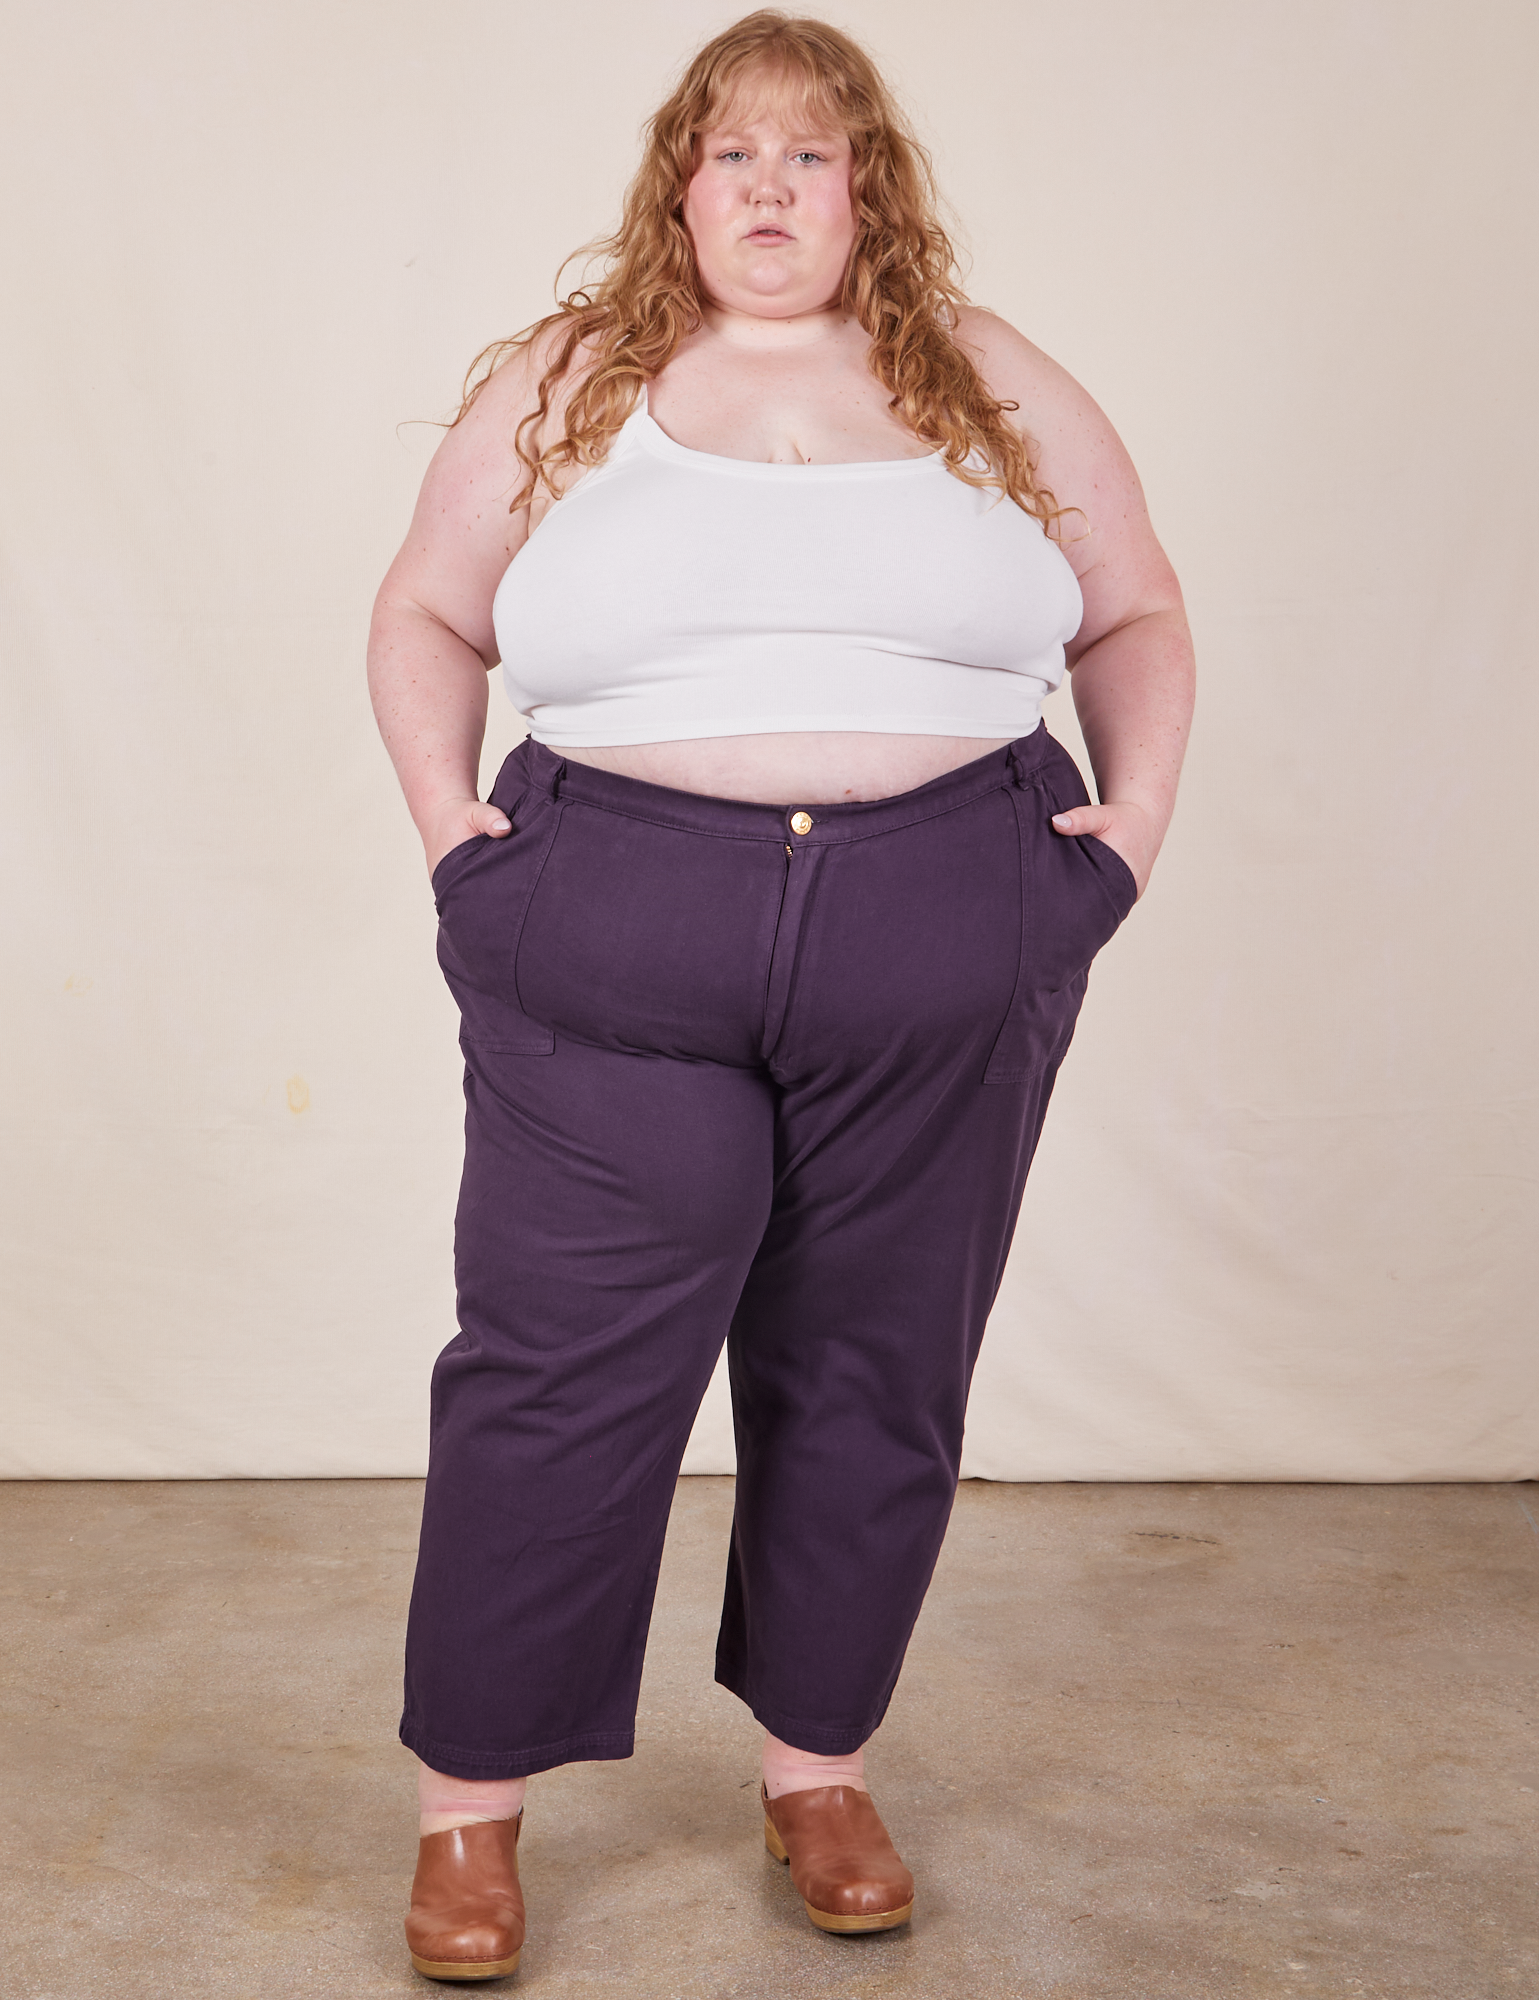 Catie is 5&#39;11&quot; and wearing 5XL Work Pants in Nebula Purple and Cropped Cami in vintage tee off-white